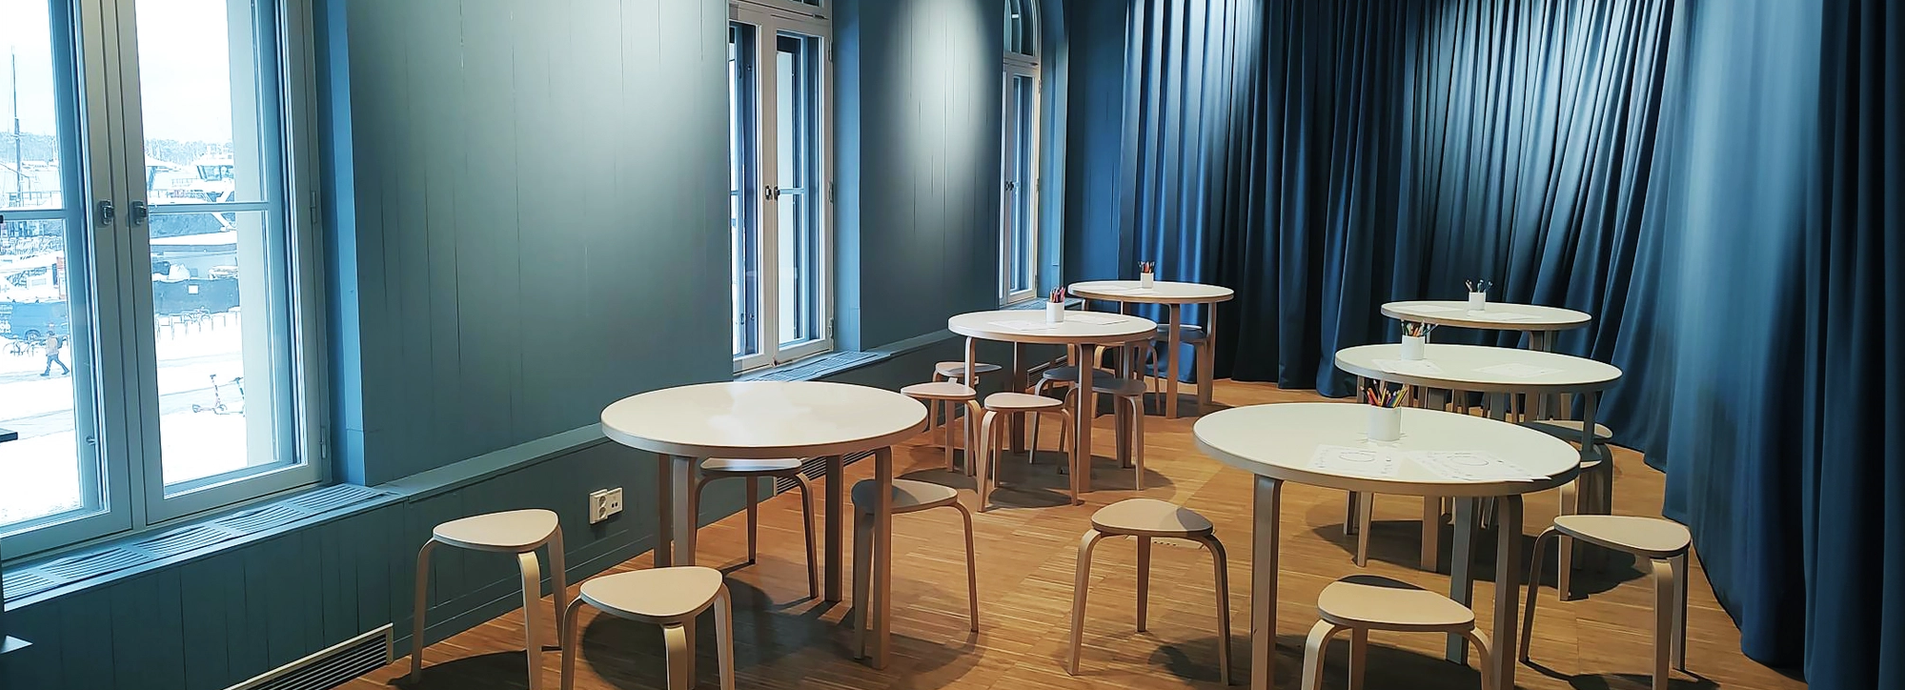 Showing the meeting room Malala. 6 round tables with backless chairs surrounding them. The room has blue walls and blue modern curtains as well as big light windows. Perfect for low formality gatherings.